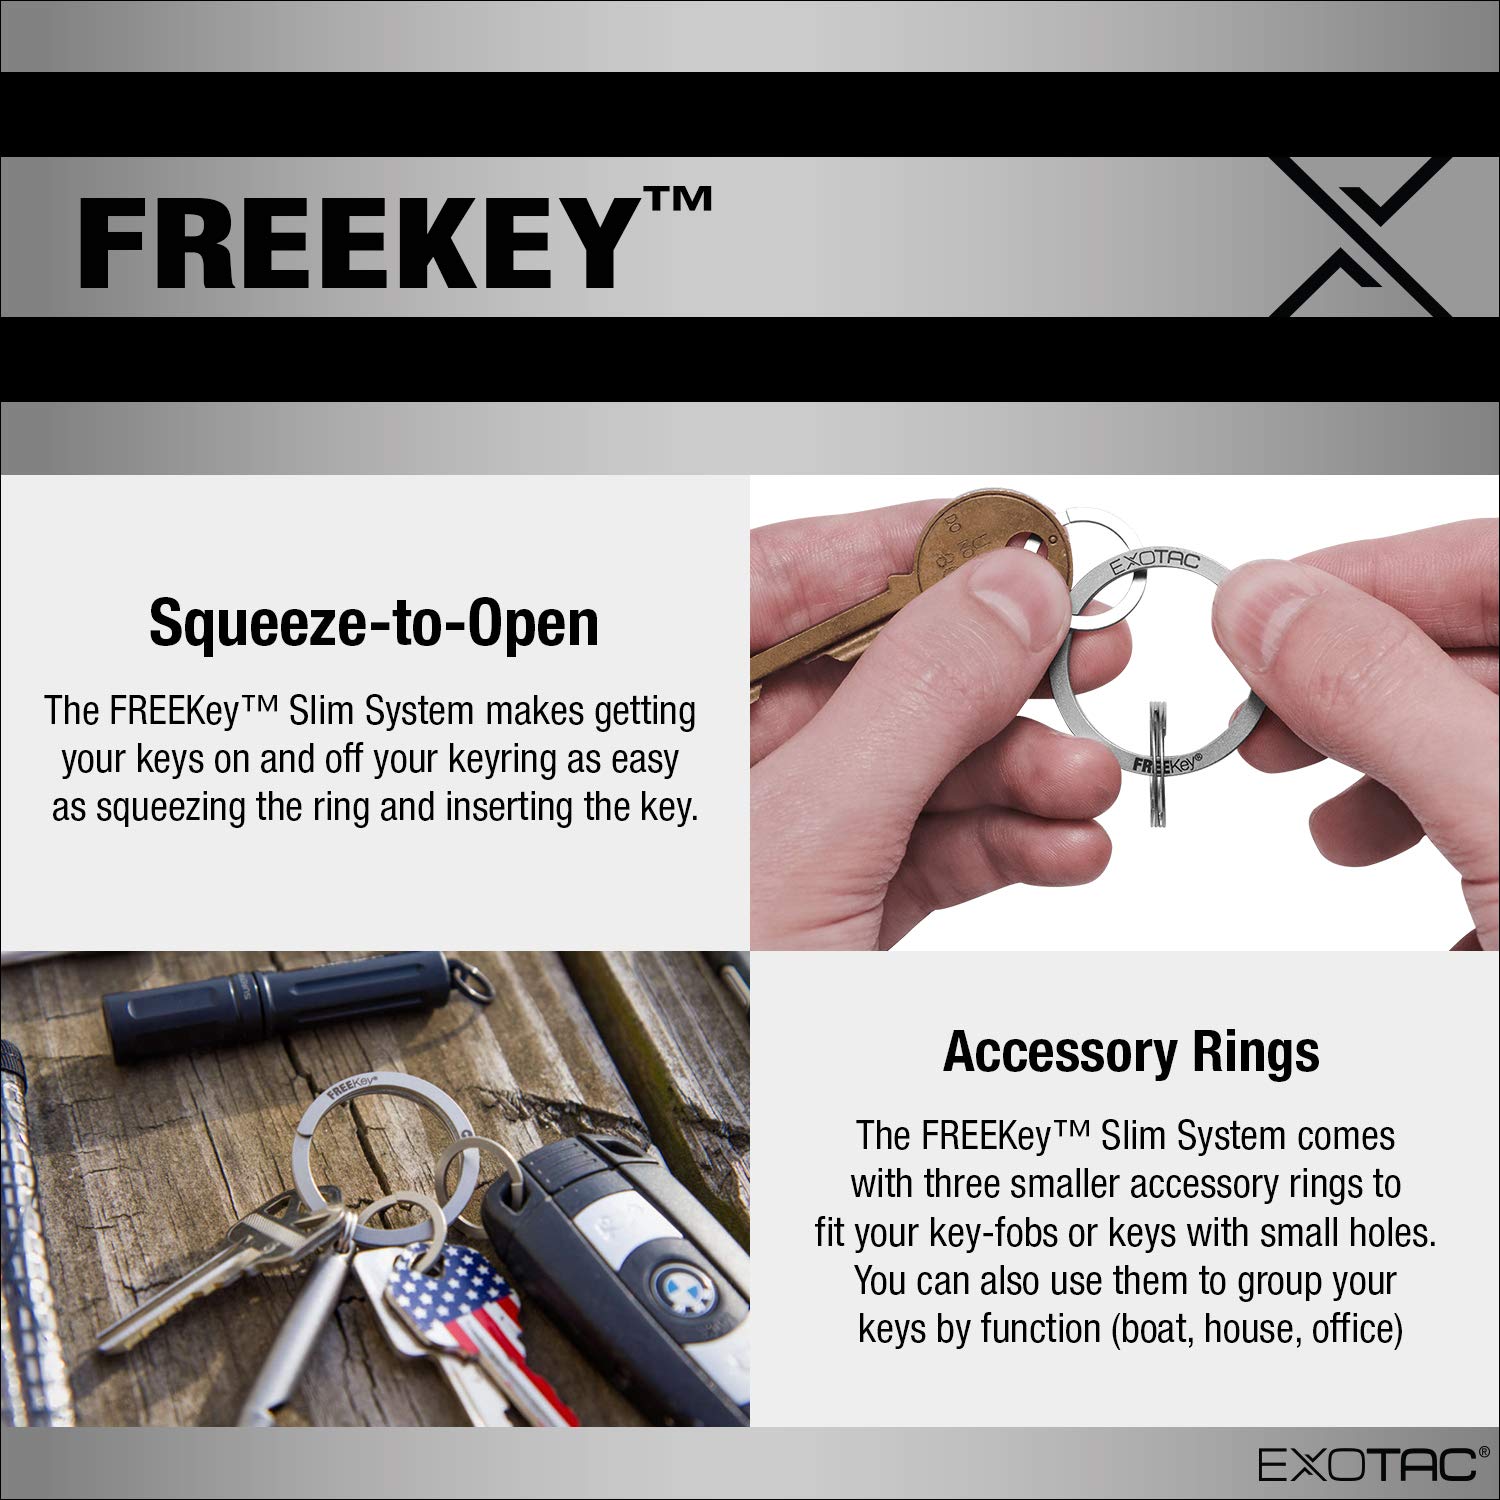 Exotac FREEkey Slim System Squeeze-to-open Keyring, Easily Add and Remove Keys, Further Organize Keys with Included Accessory Ring Spares